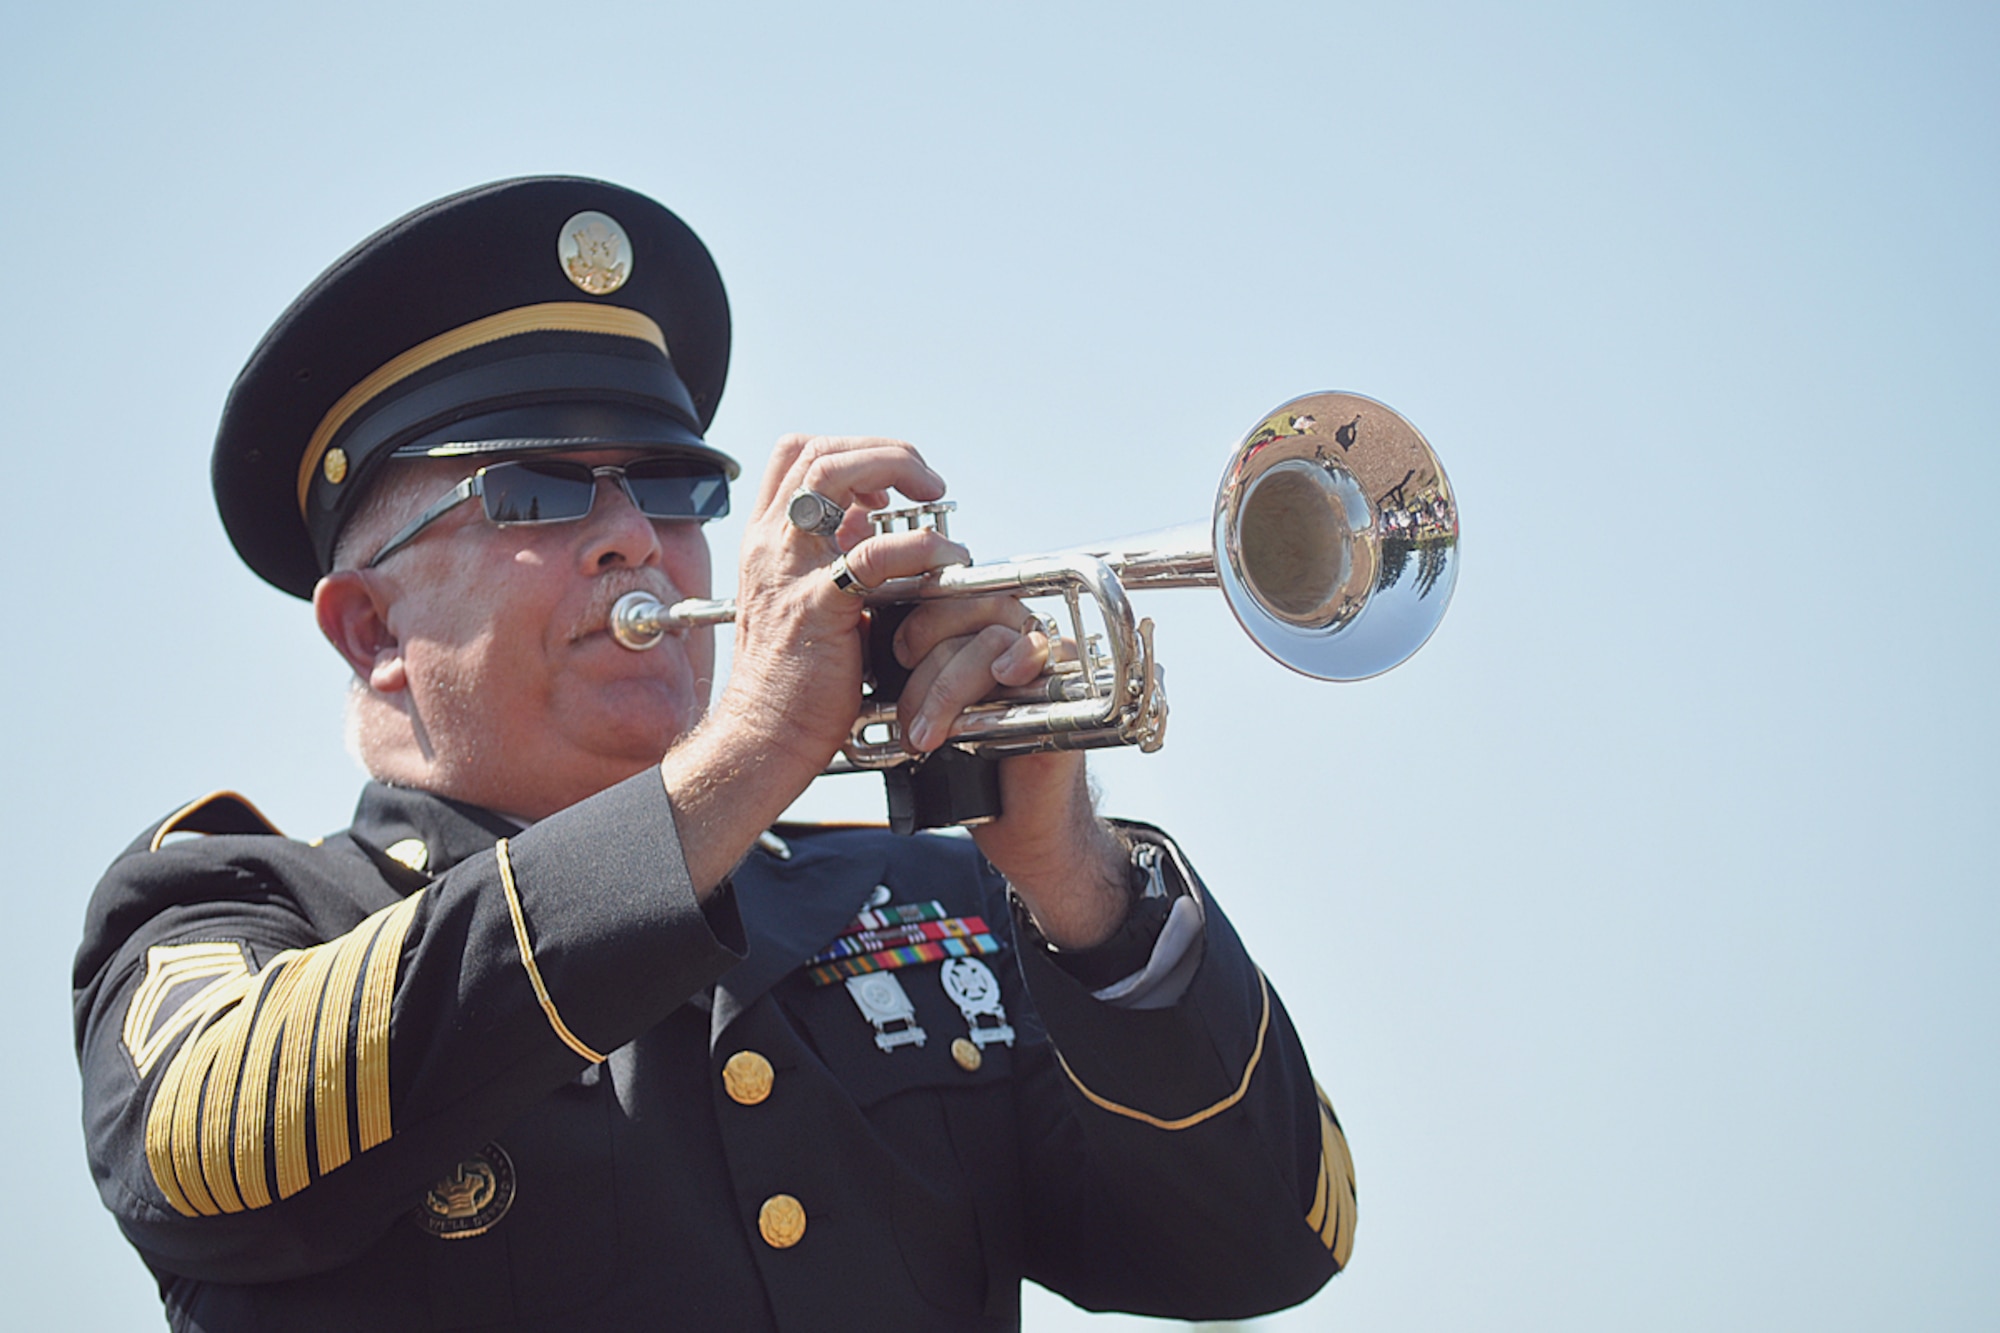 Retired Army Master Sgt. Michael Baty plays Taps as part of the Bugles Across America presentation at Monday's Memorial Day ceremony at the Fort Richardson National Cemetery.  (Air Force photo by John Pennell/JBER PA)